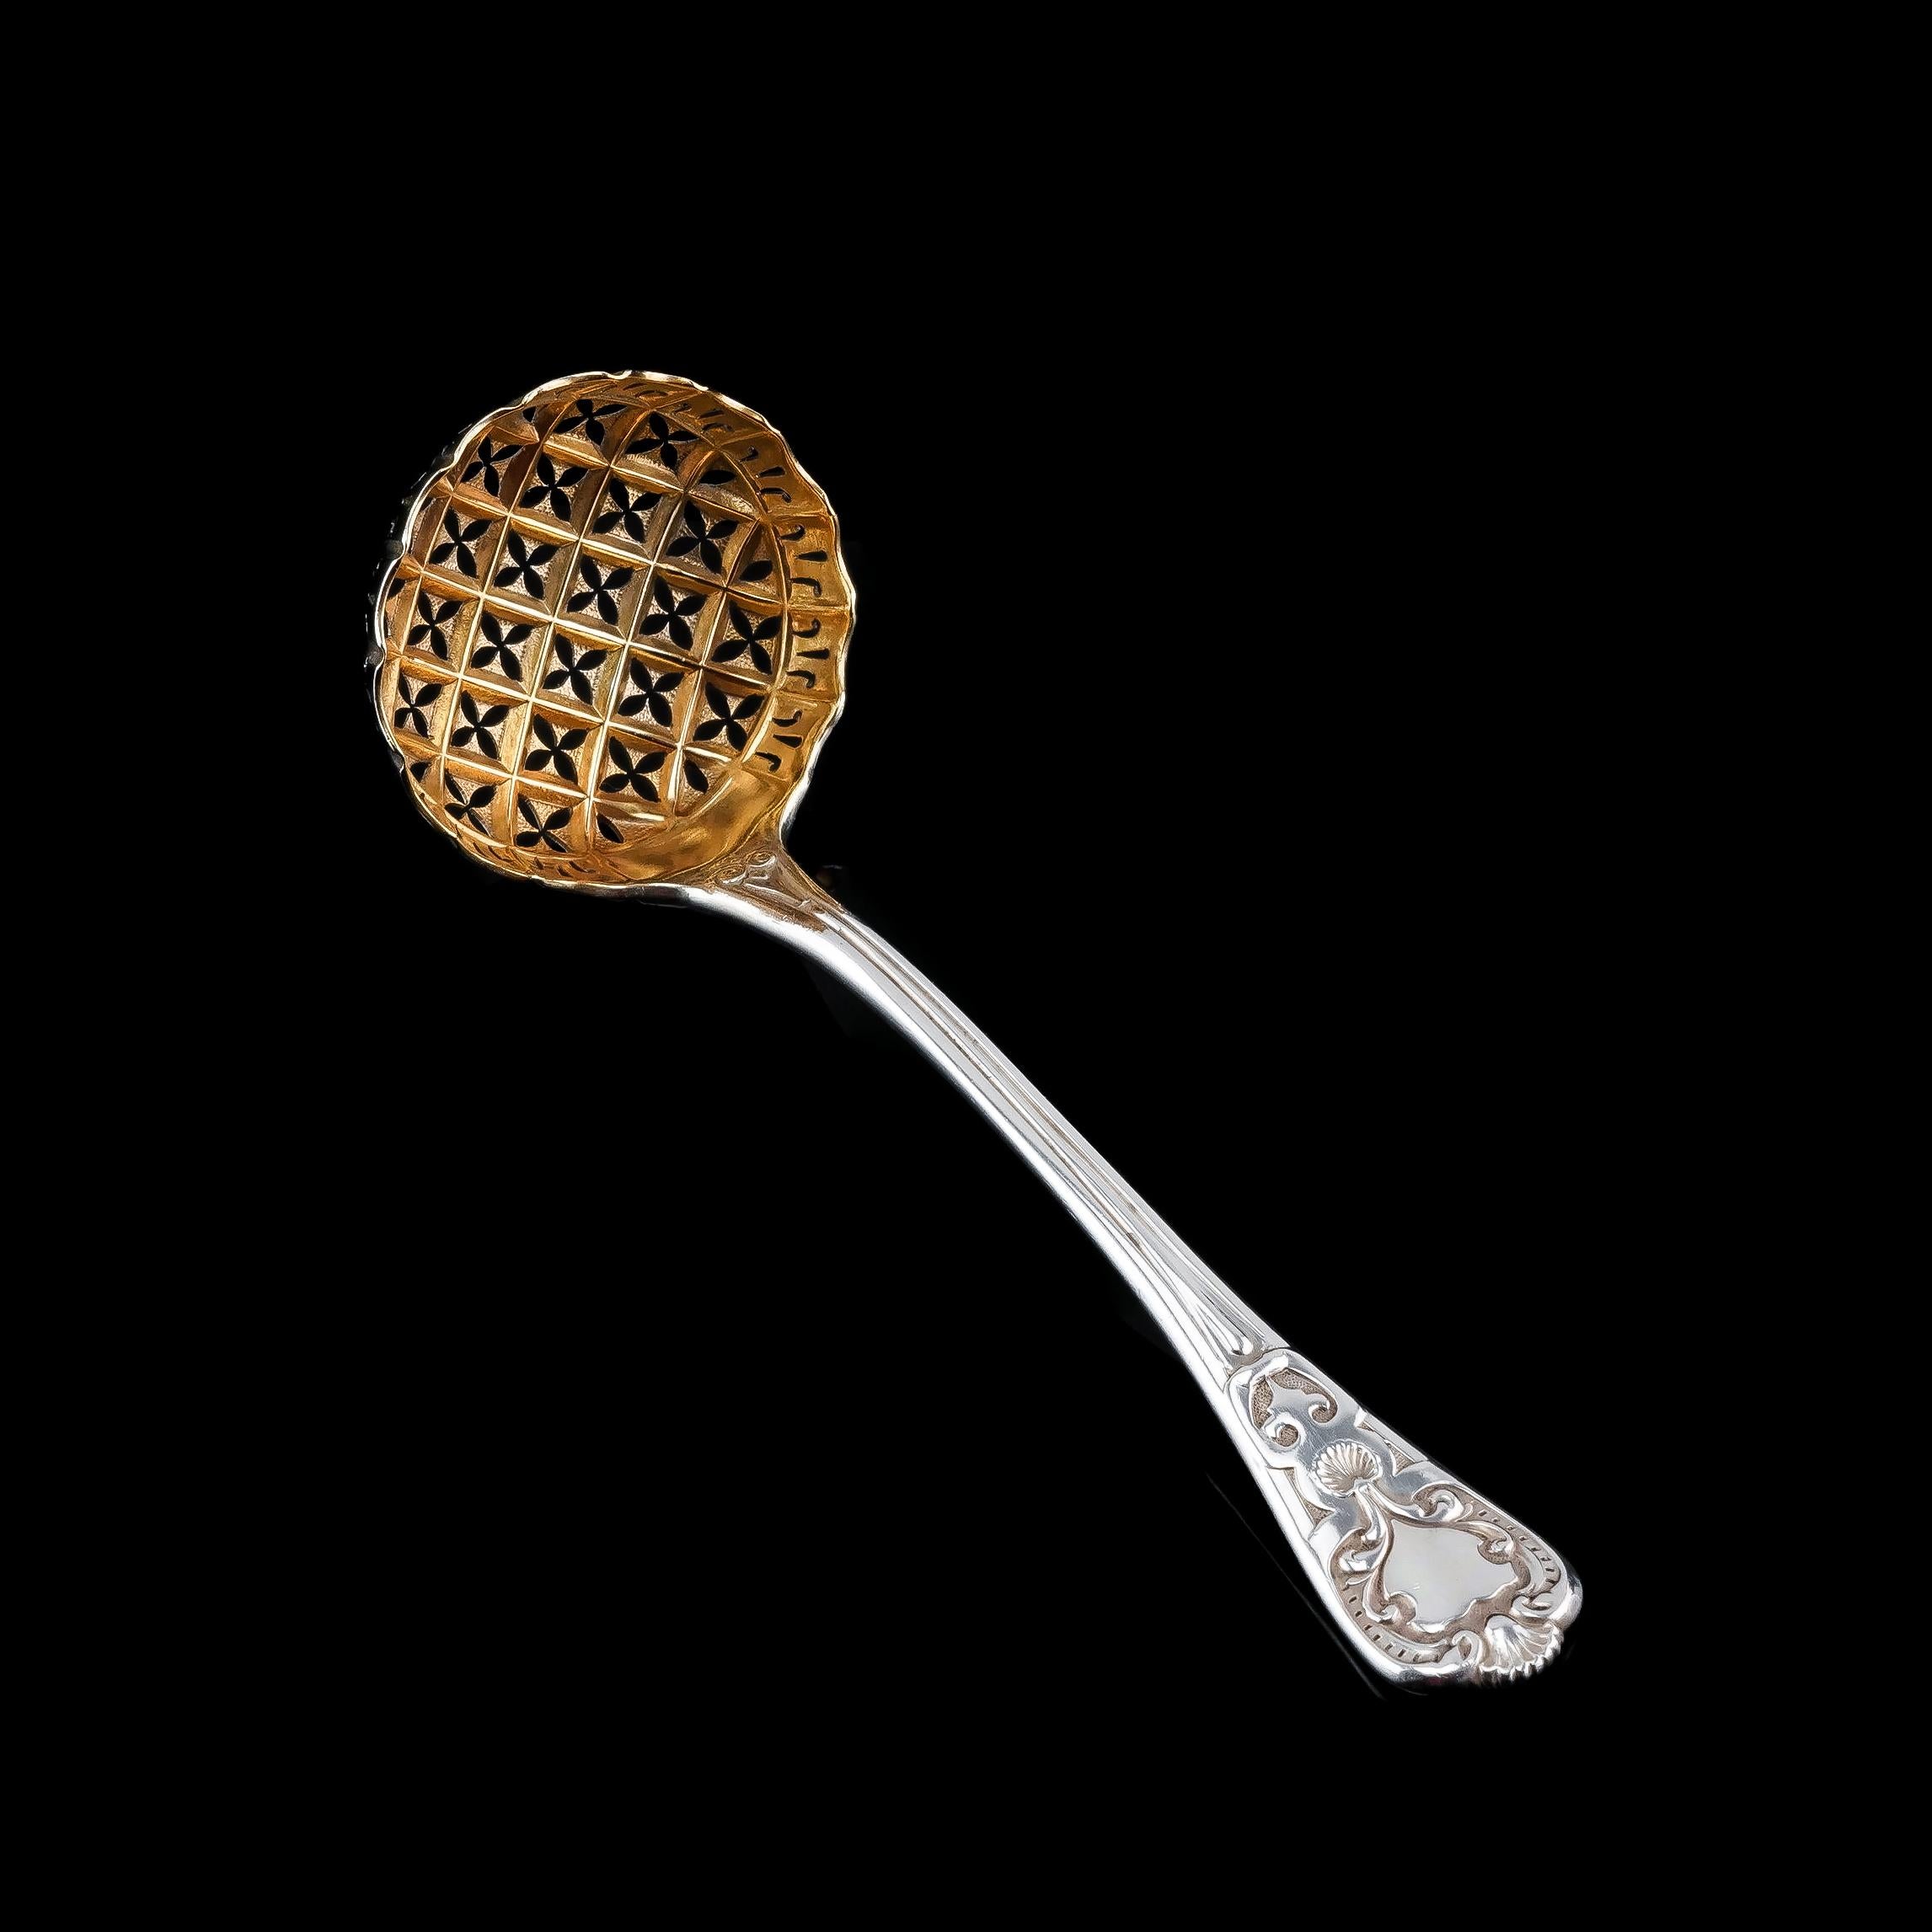 We are delighted to offer this quality Victorian solid silver sugar sifter spoon made in London in 1856 by Francis Higgins.
 
As to be expected with Higgins' fine flatware, this spoon is of no exception featuring an array of highly desirable and